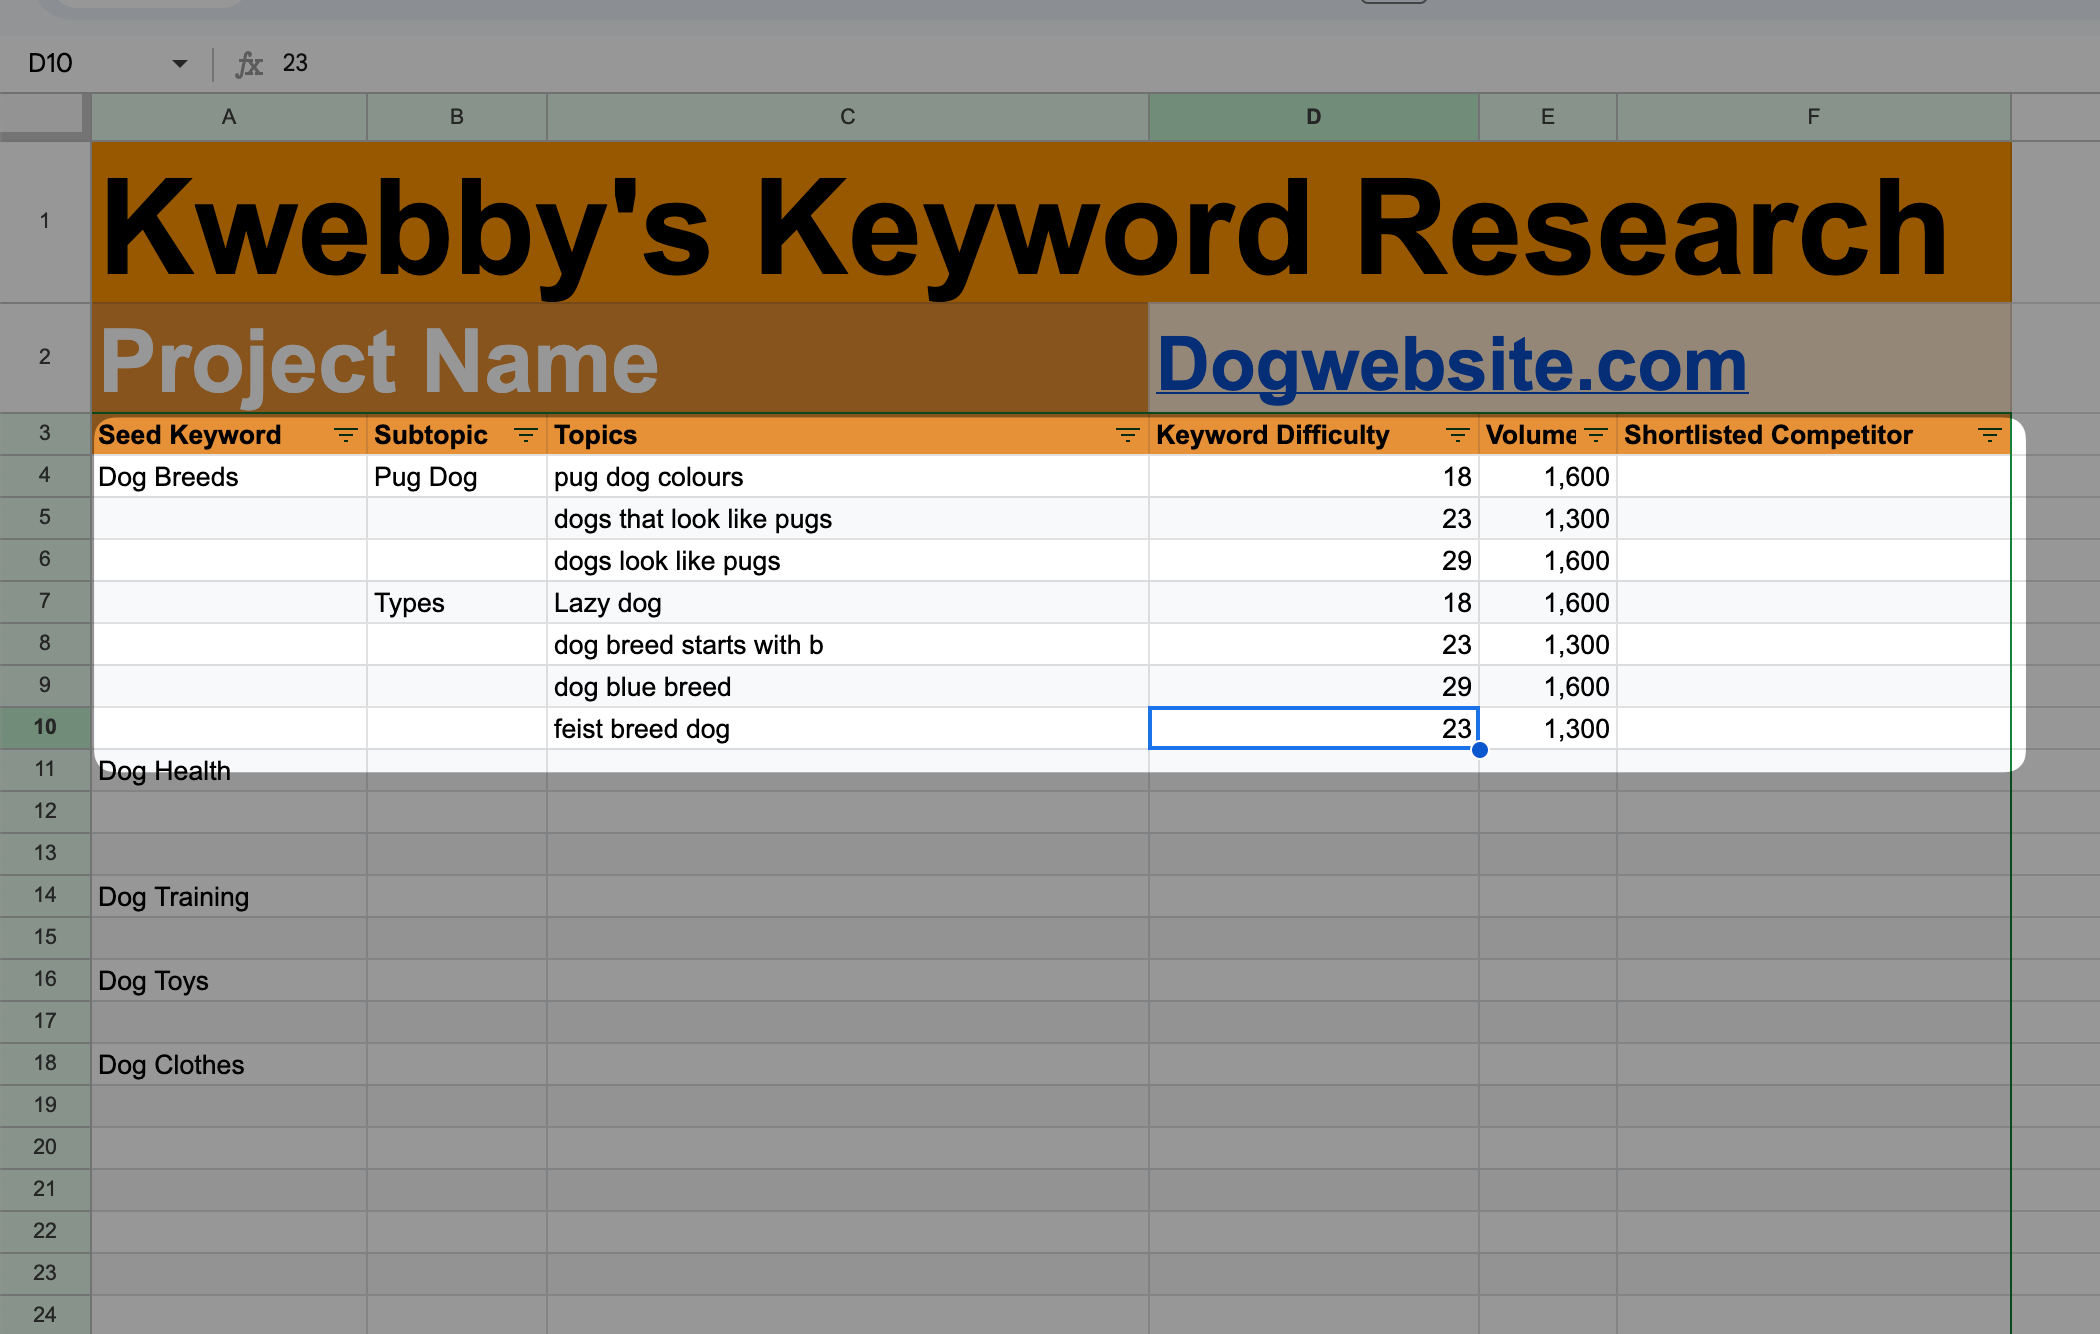 How to do Keyword Research for New Sites to Get 100k Traffic (Template Inside) 8